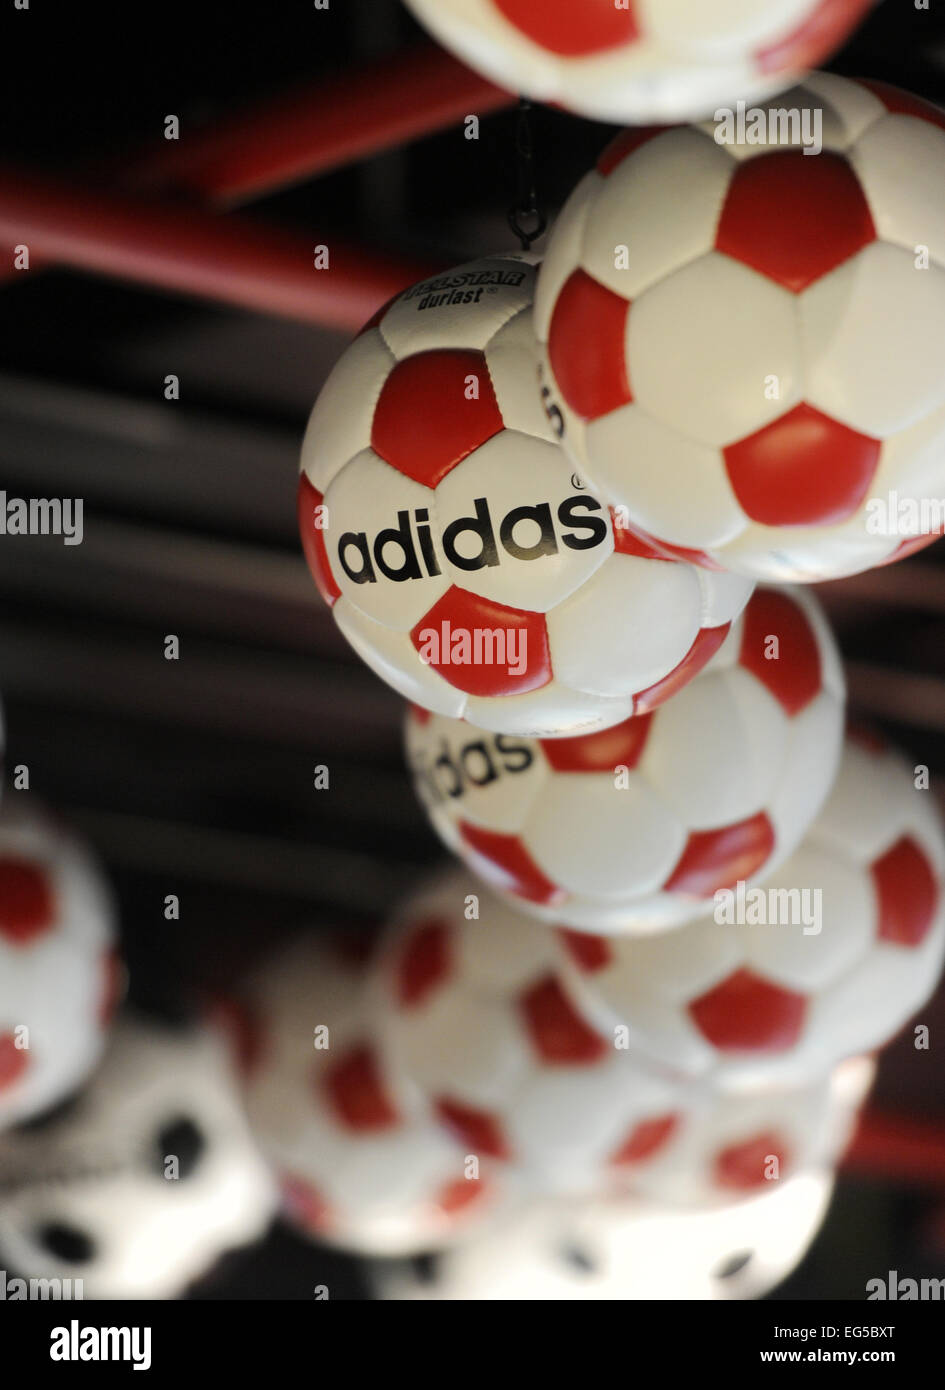 Adidas Museum High Resolution Stock Photography and Images - Alamy